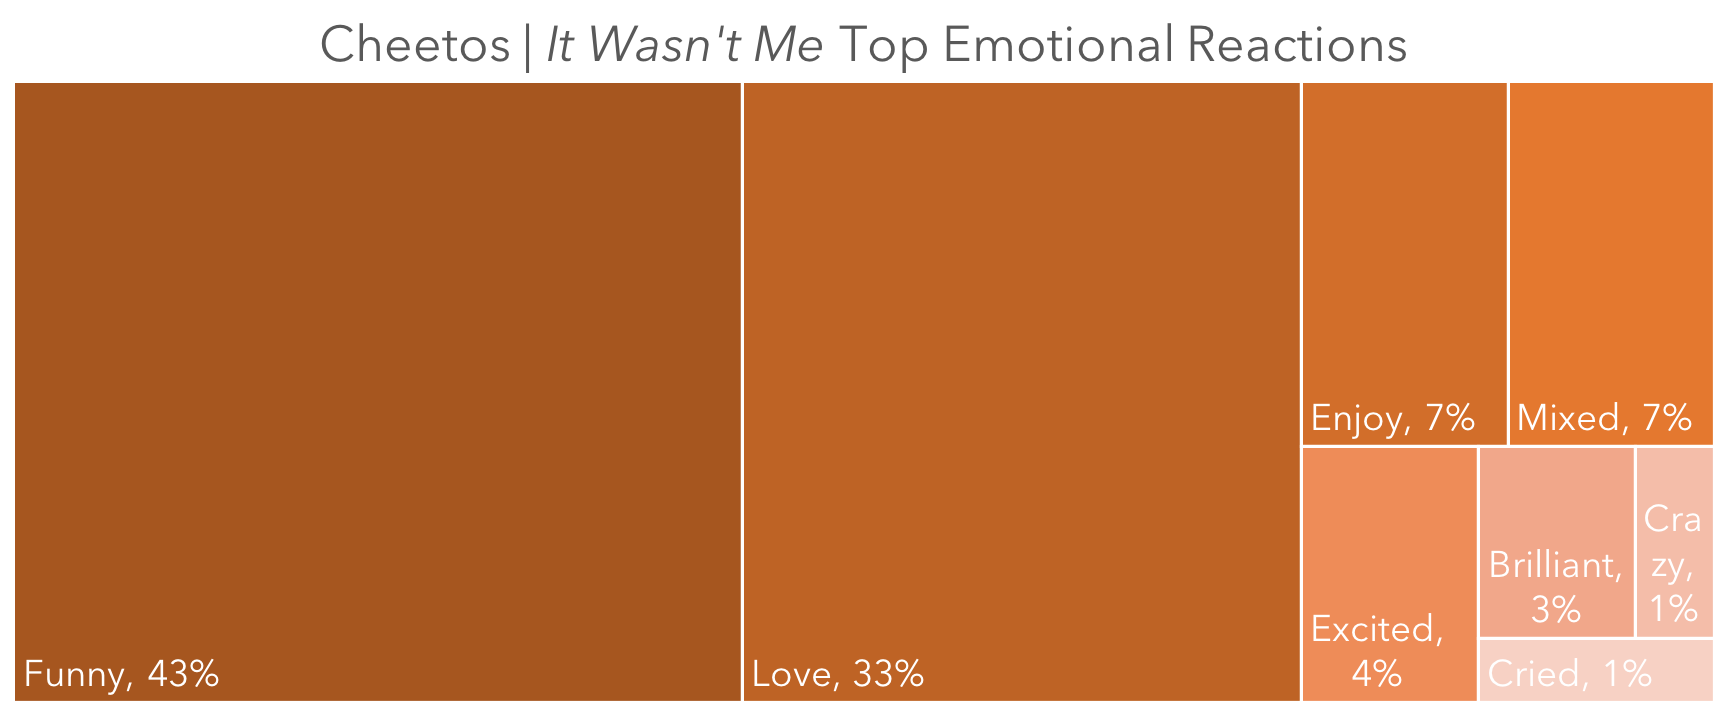 Source: Top Emotional Reactions, Cheetos It Wasn’t Me on YouTube